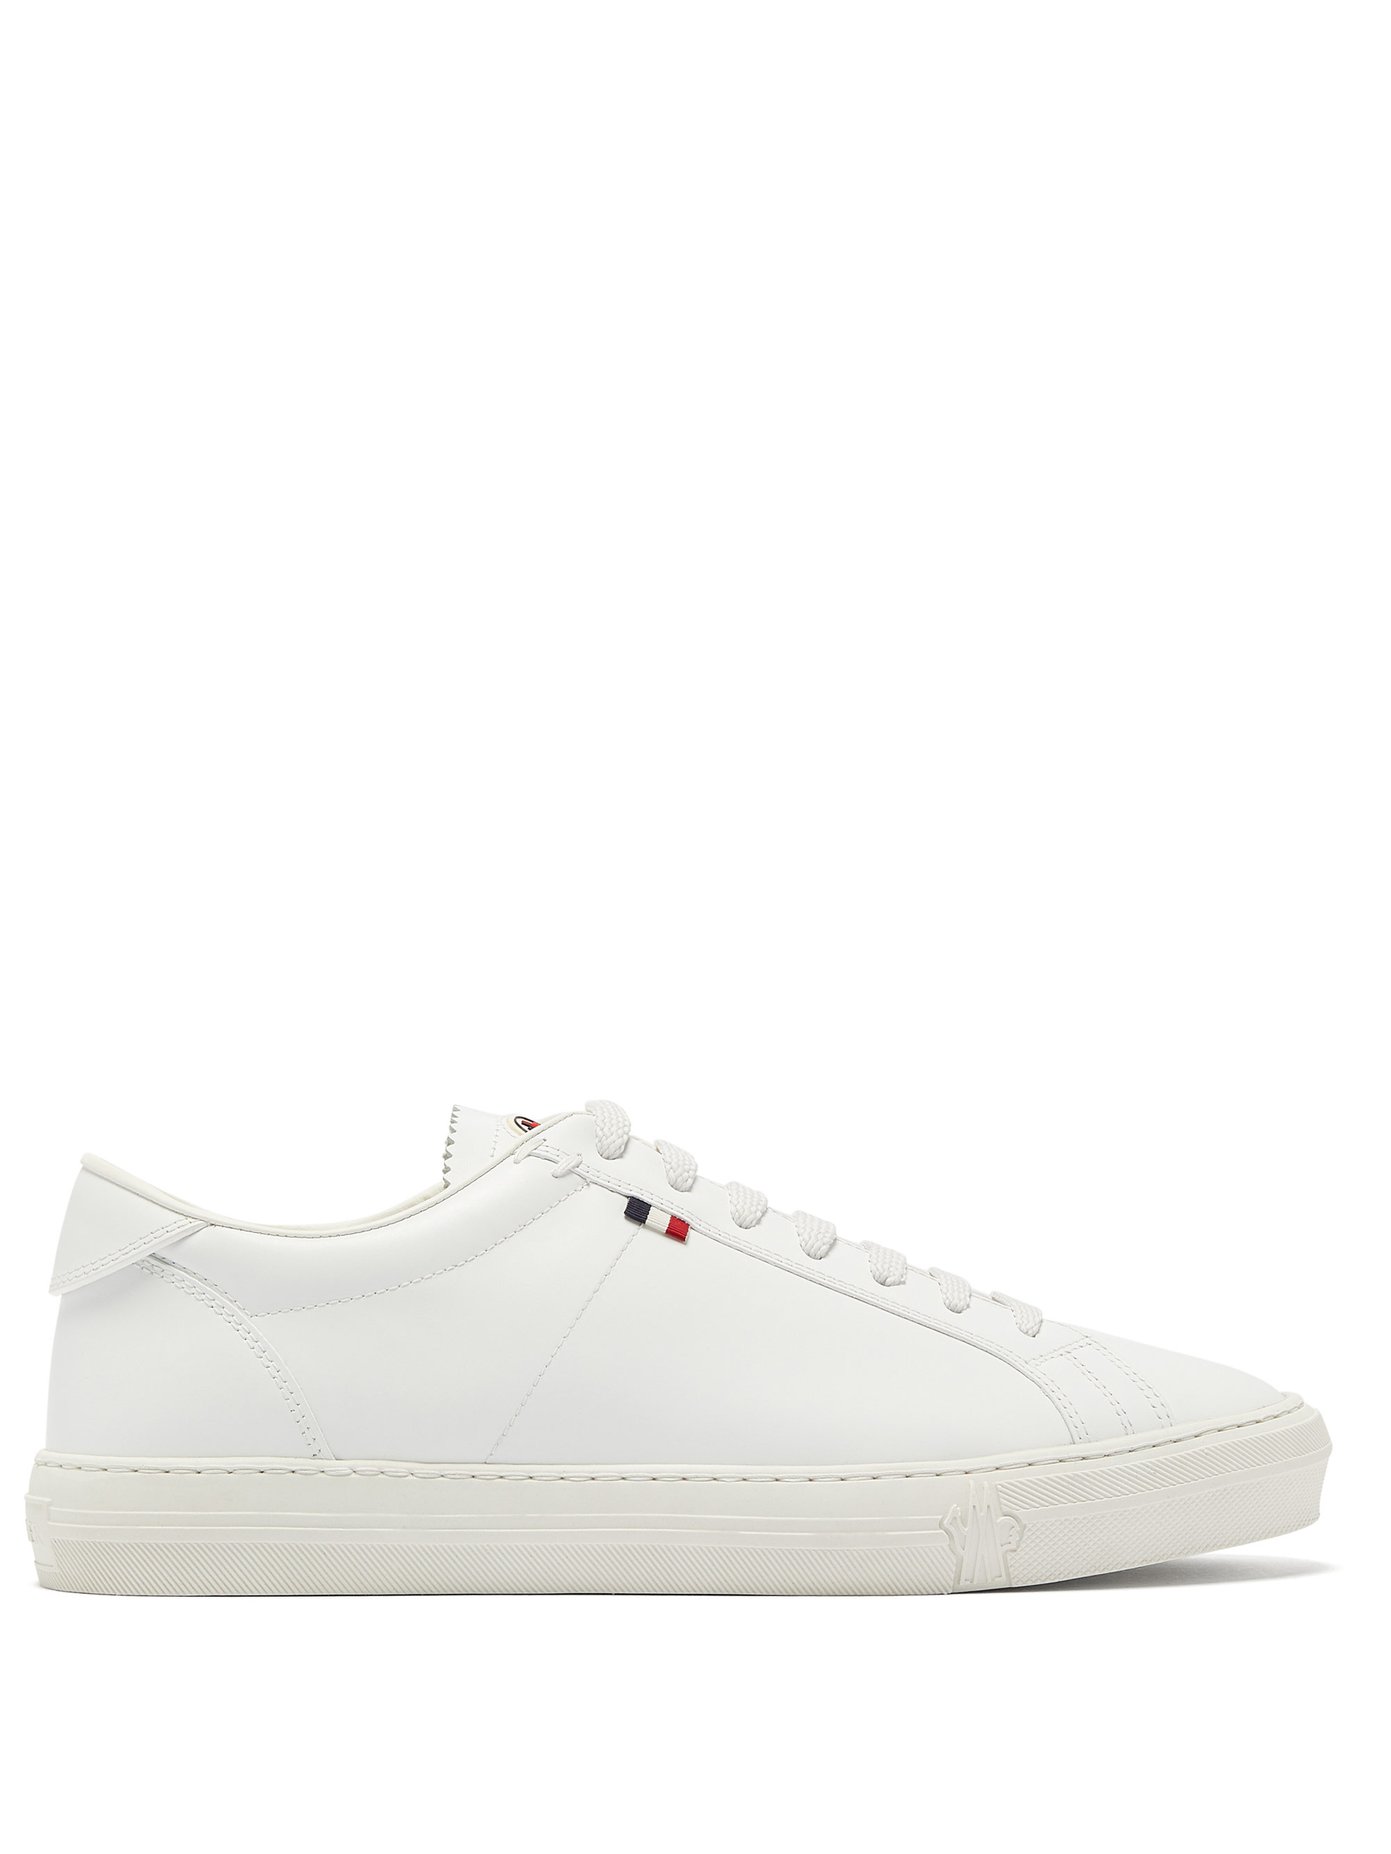 Monaco leather trainers | Moncler 